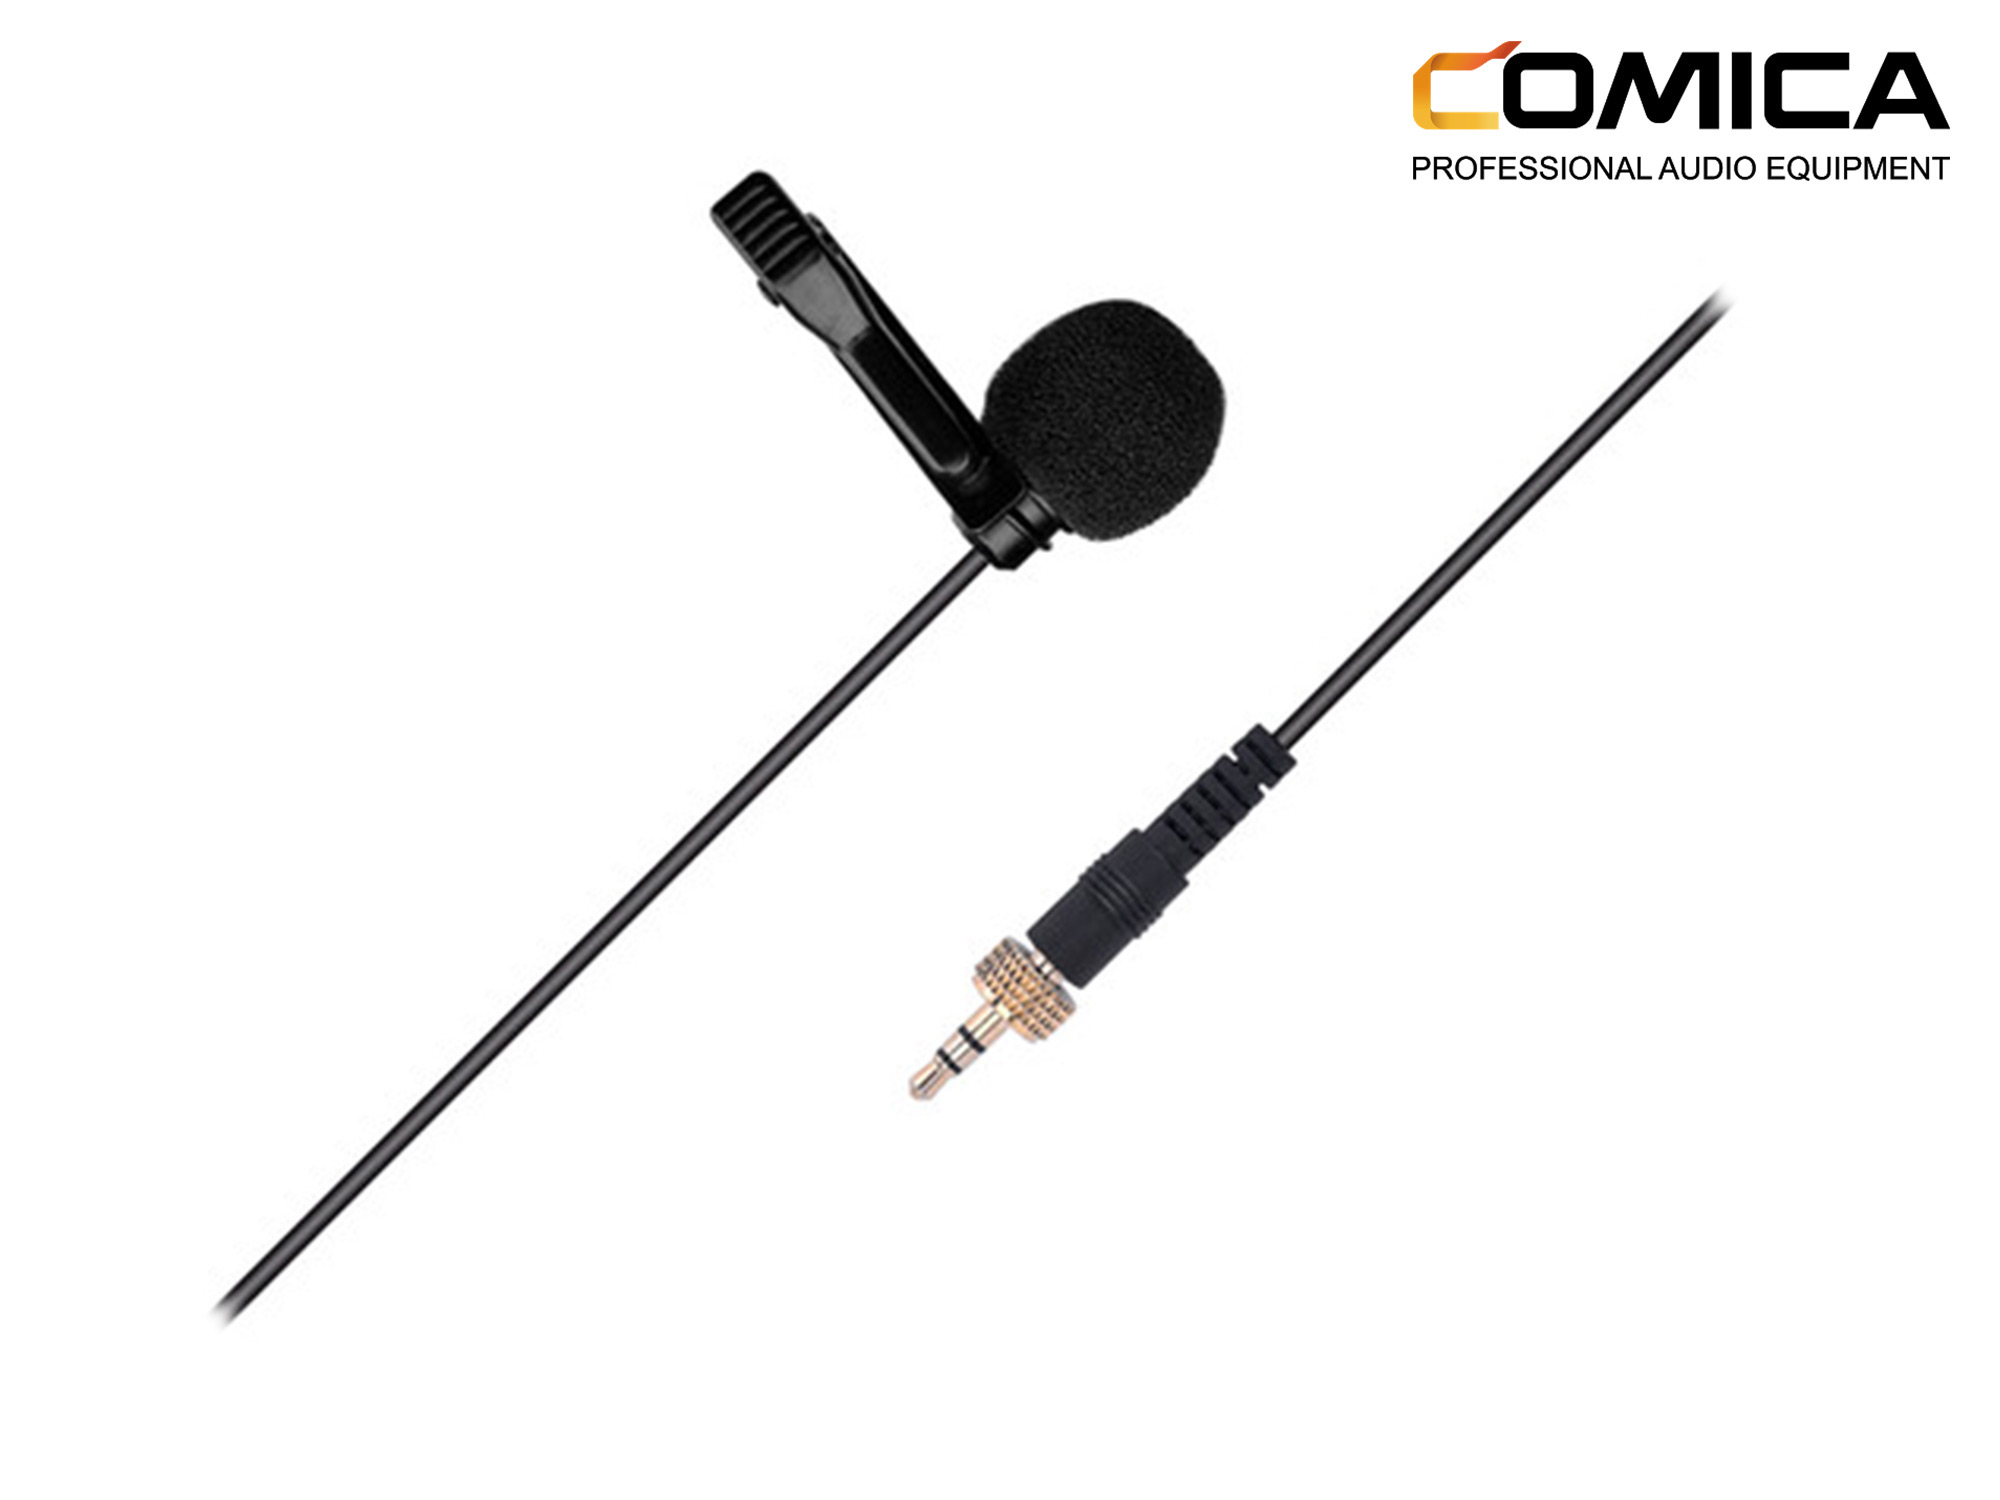 CVM-M-01 Lavalier Mic for Comica Wireless System